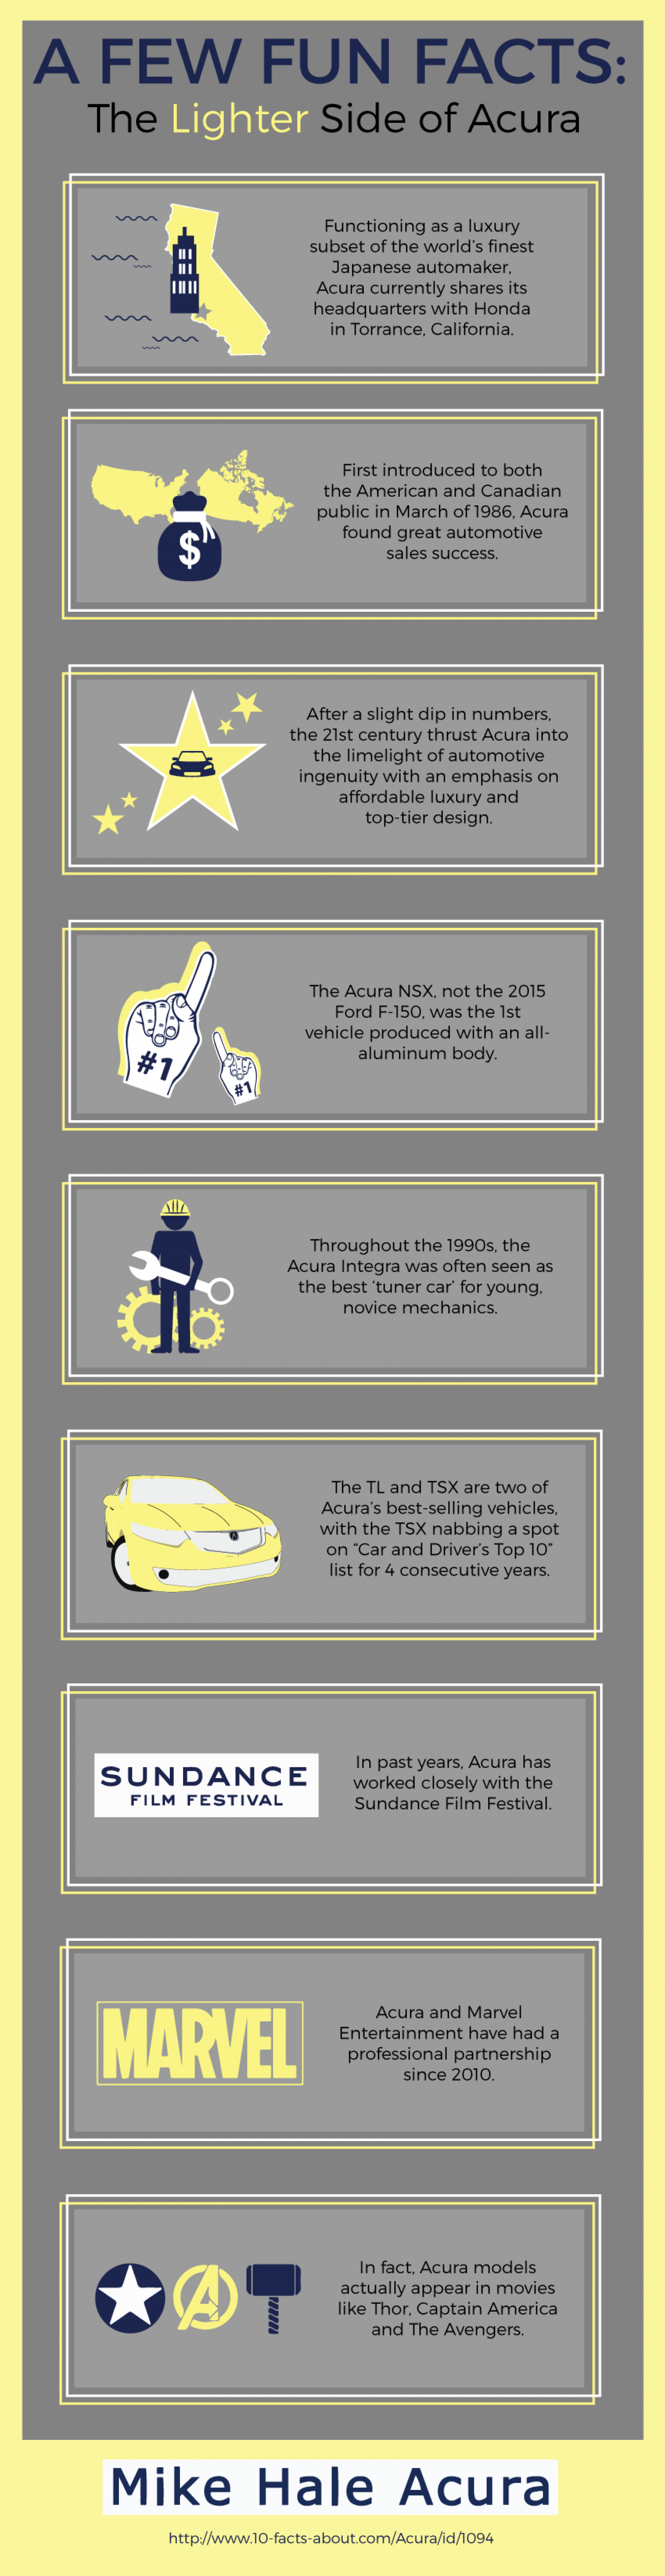 A Few Fun Facts: the Lighter Side of Acura Infographic